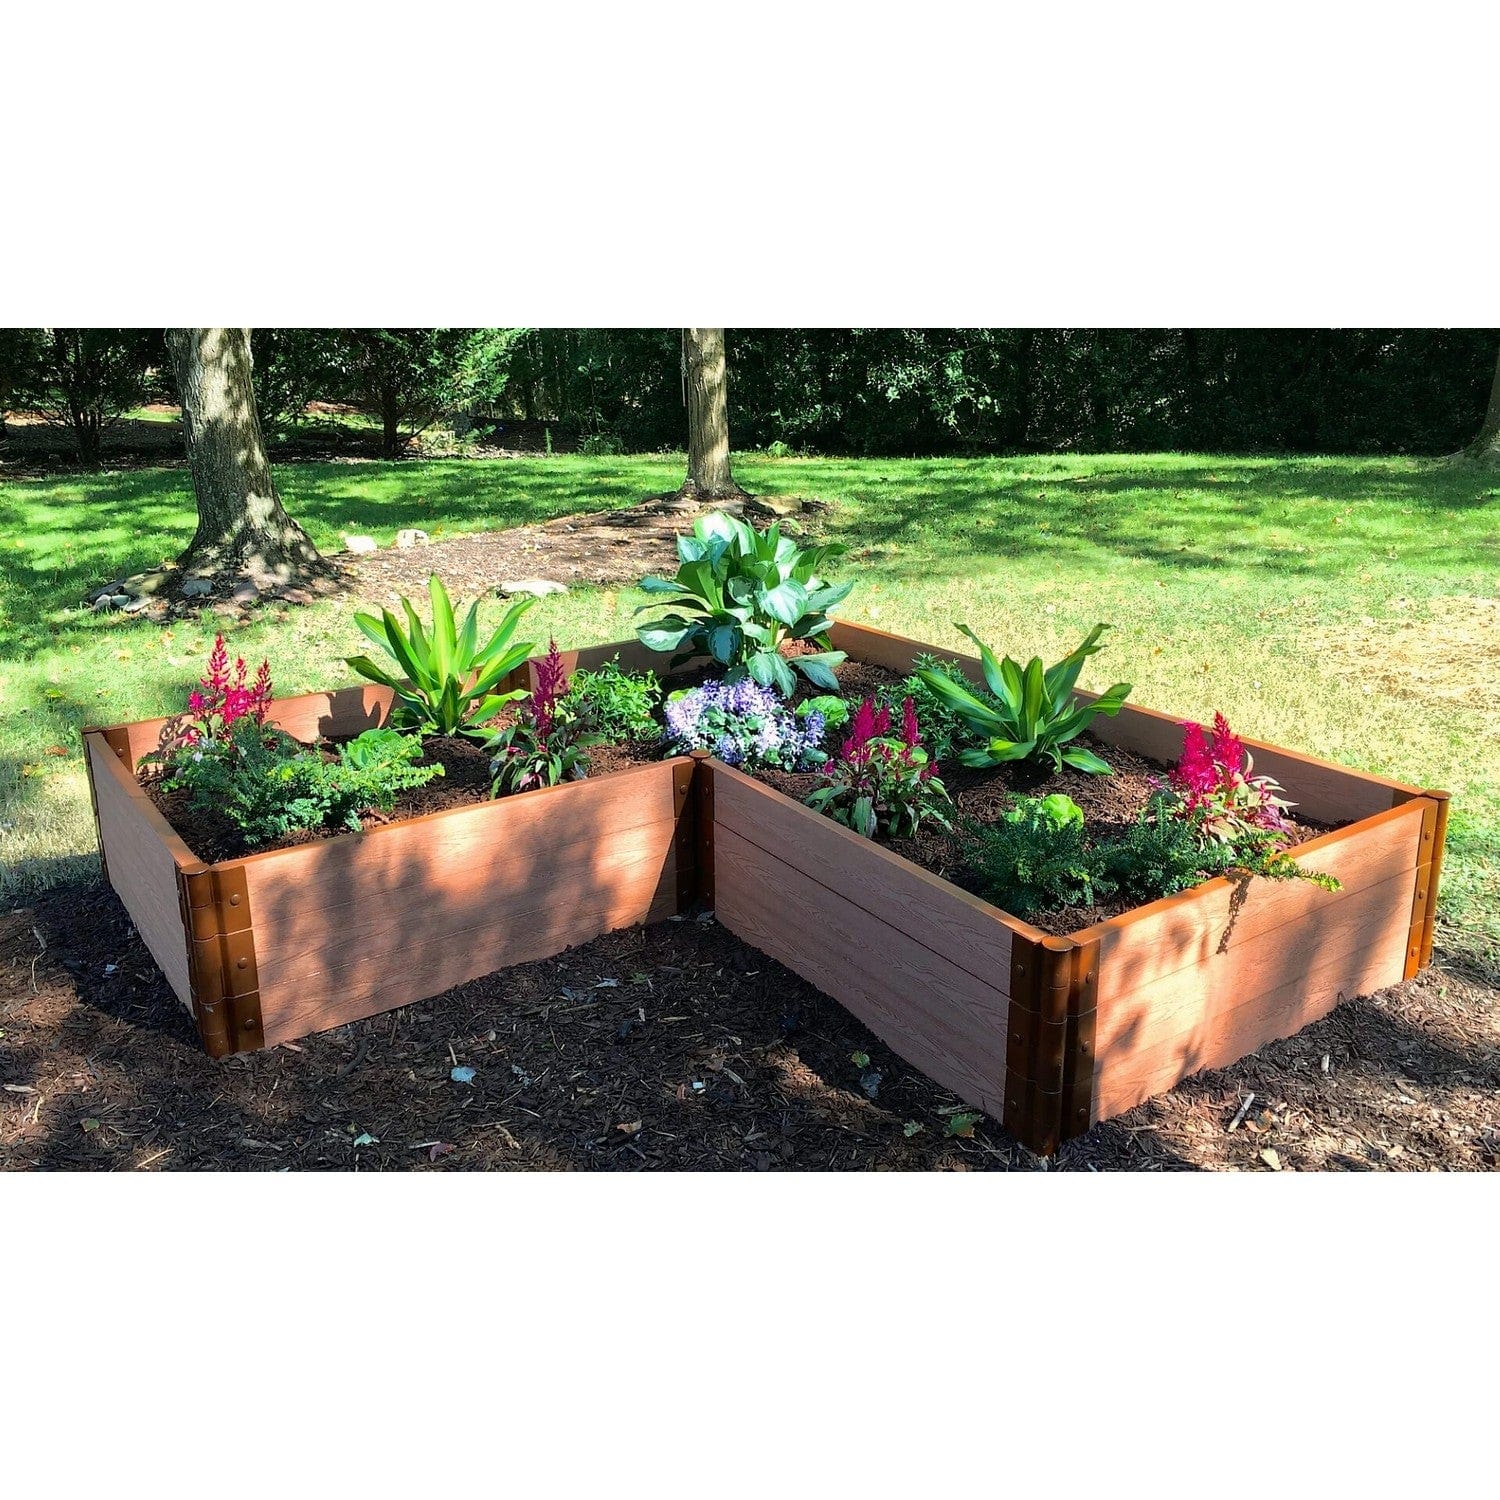 Frame It All Gardening Accessories Frame It All | Tool-Free Arrowhead Straight Corner Raised Garden Bed - 8' X 8' X 11" - Weathered Wood - 1" Profile 800002002